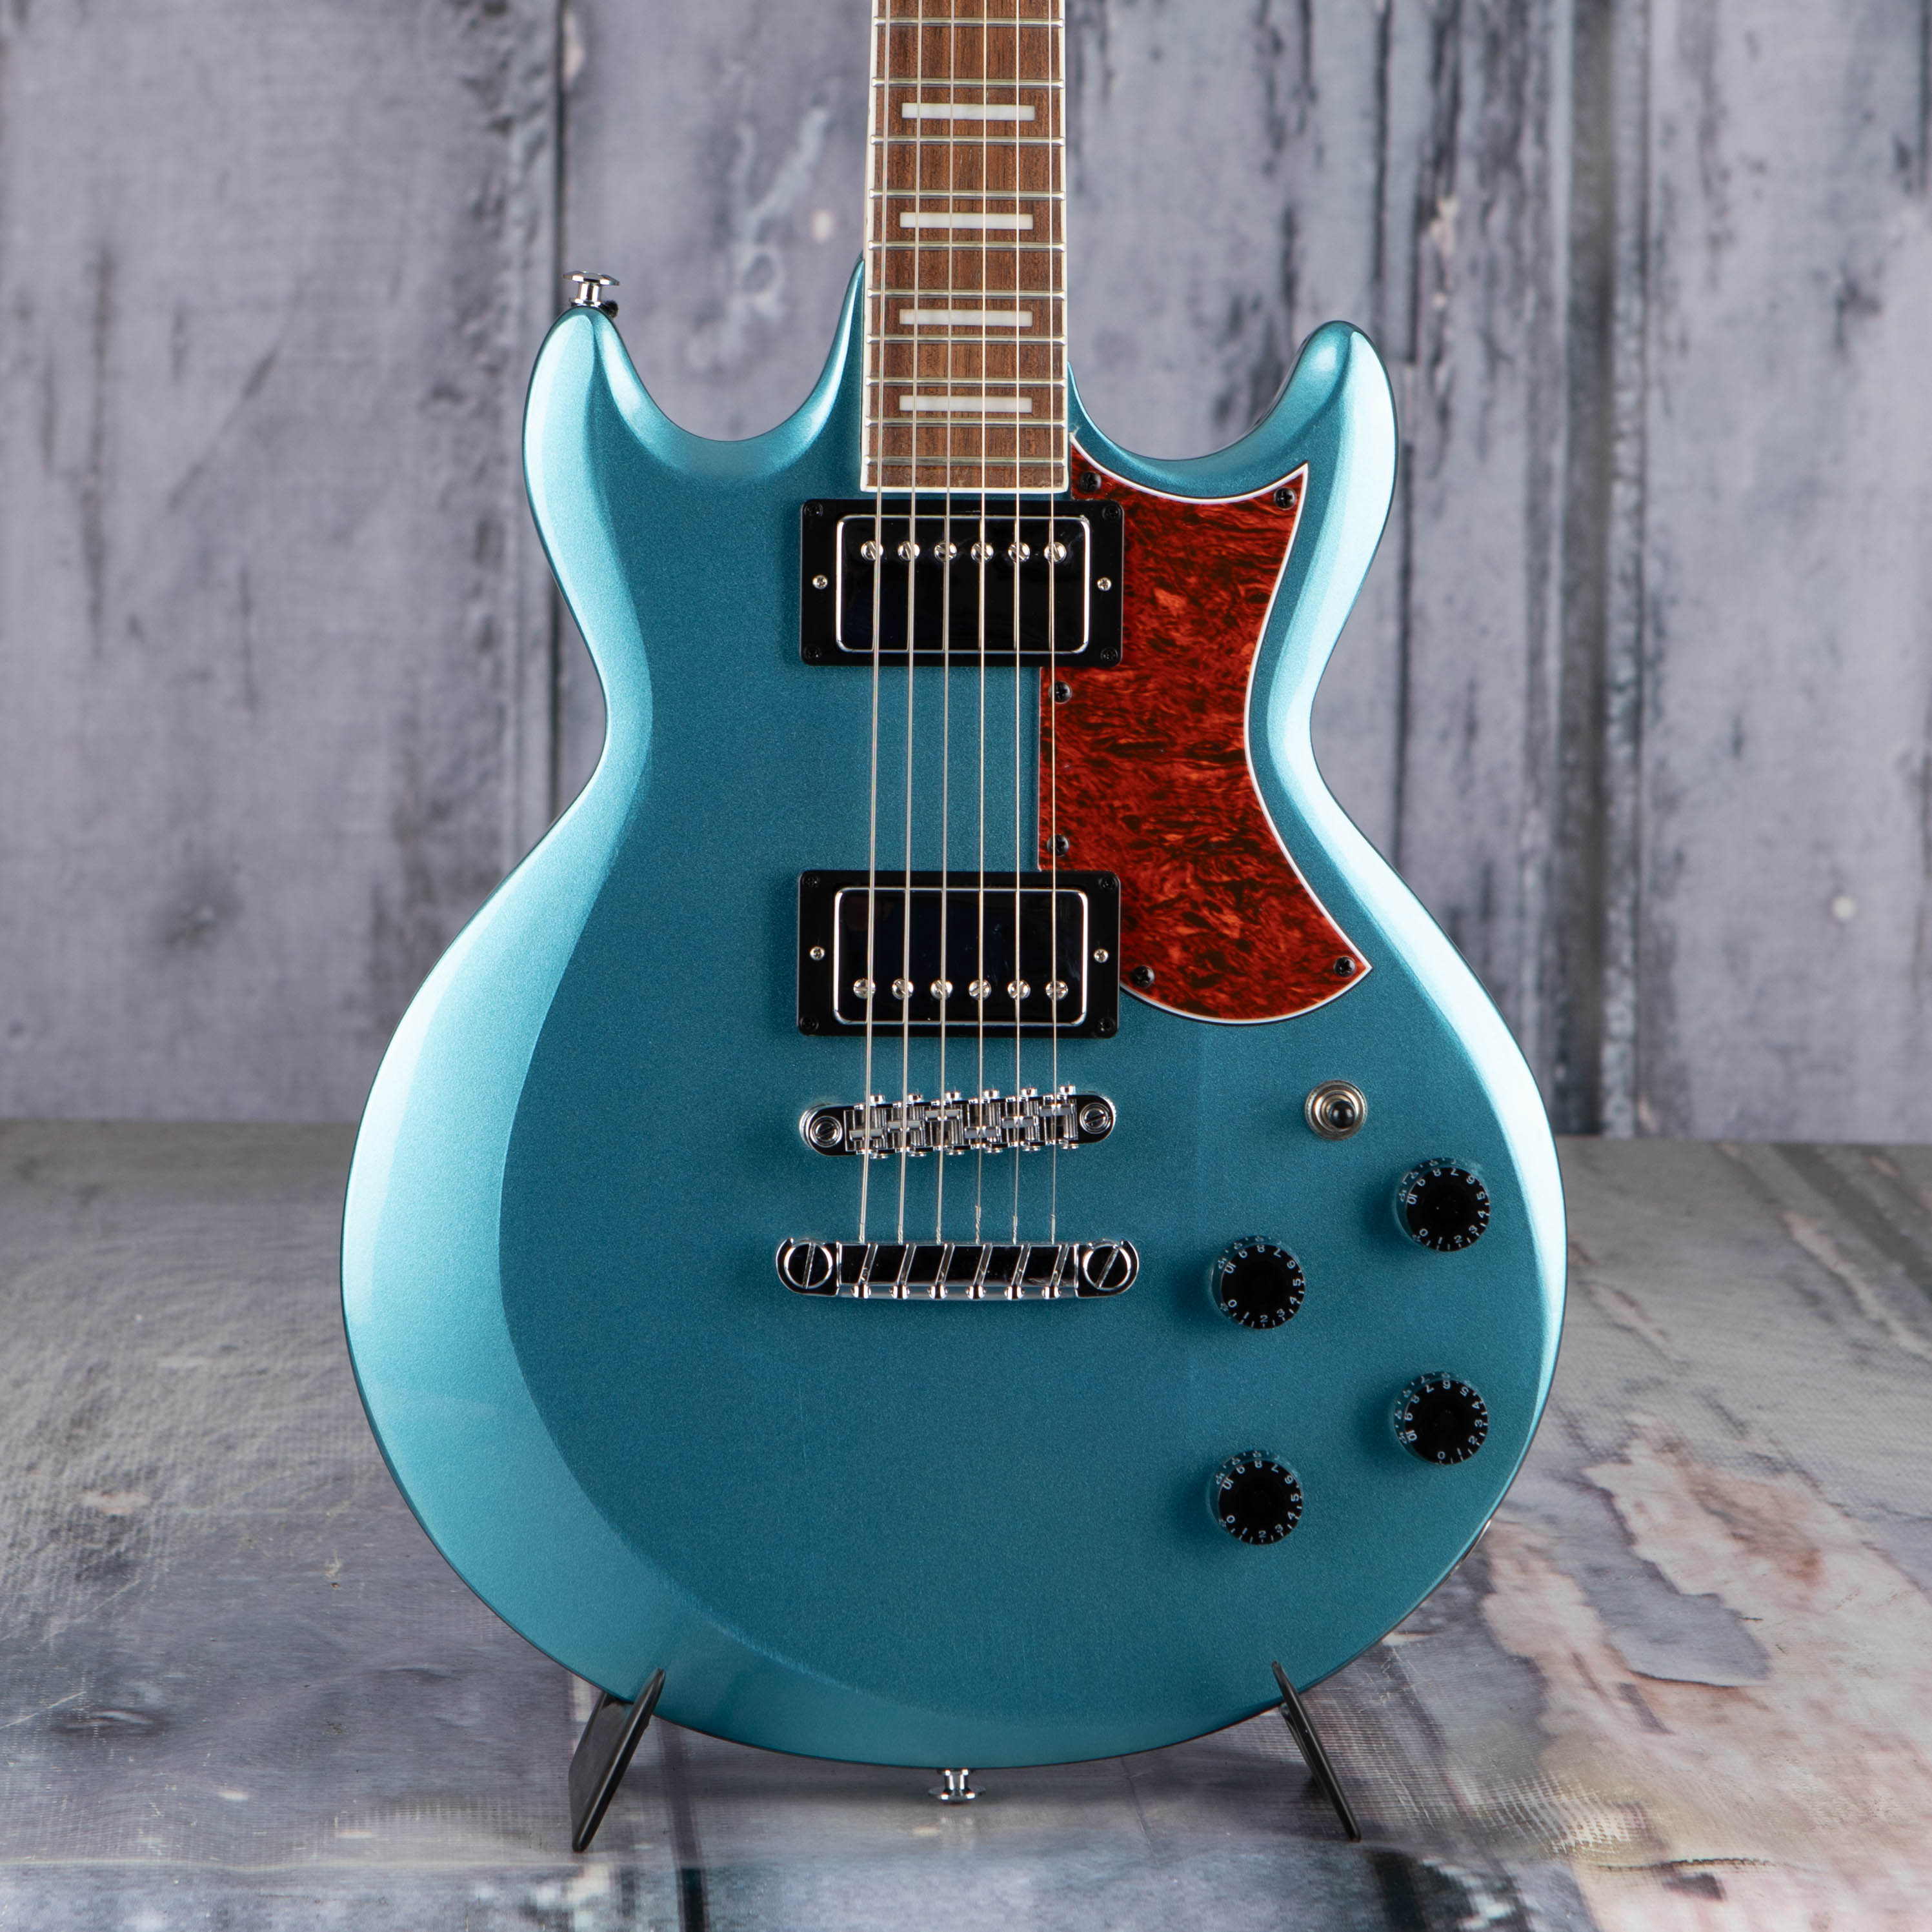 Used Ibanez AX120 Electric Guitar, Metallic Light Blue, front closeup